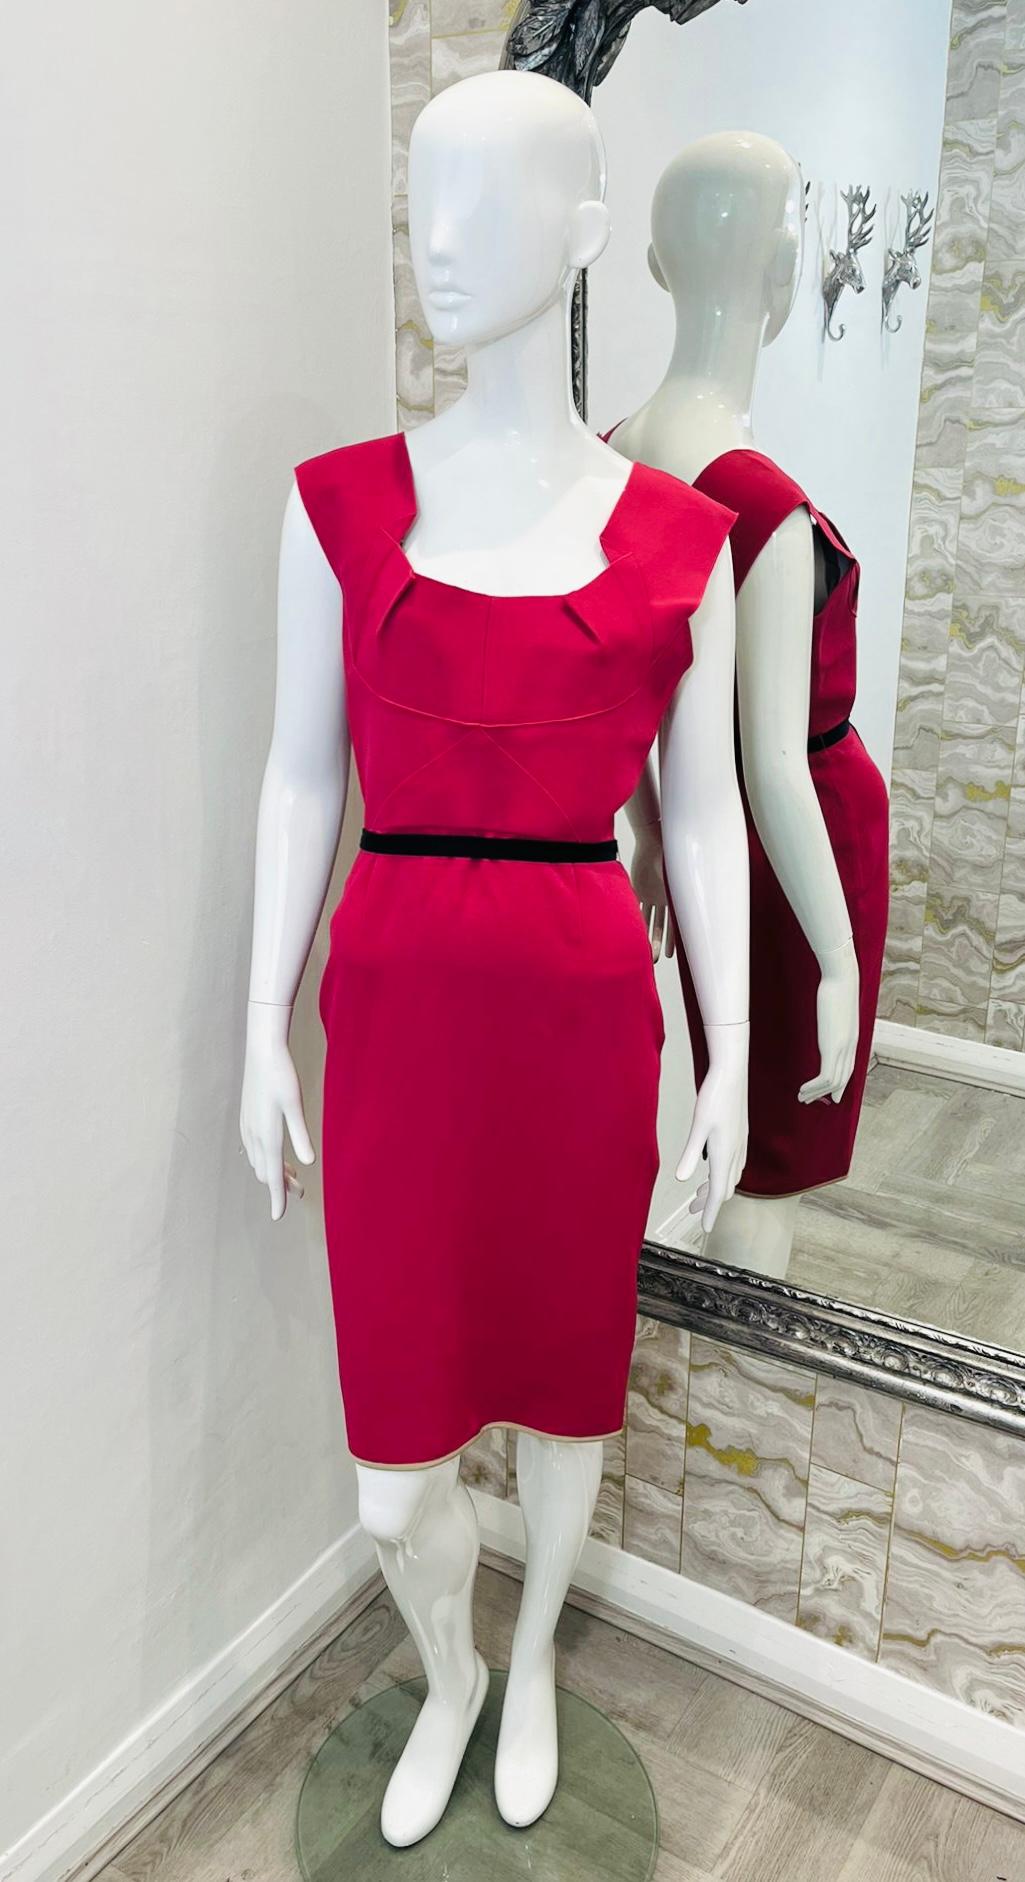 Limited Edition - Roland Mouret For Selfridges Pencil Dress

Fuchsia midi sleeveless dress designed with pleat detailed square neckline.

Featuring deep V-Neck to rear, black self-tie belted waist and zip fastening to the back.

Size –